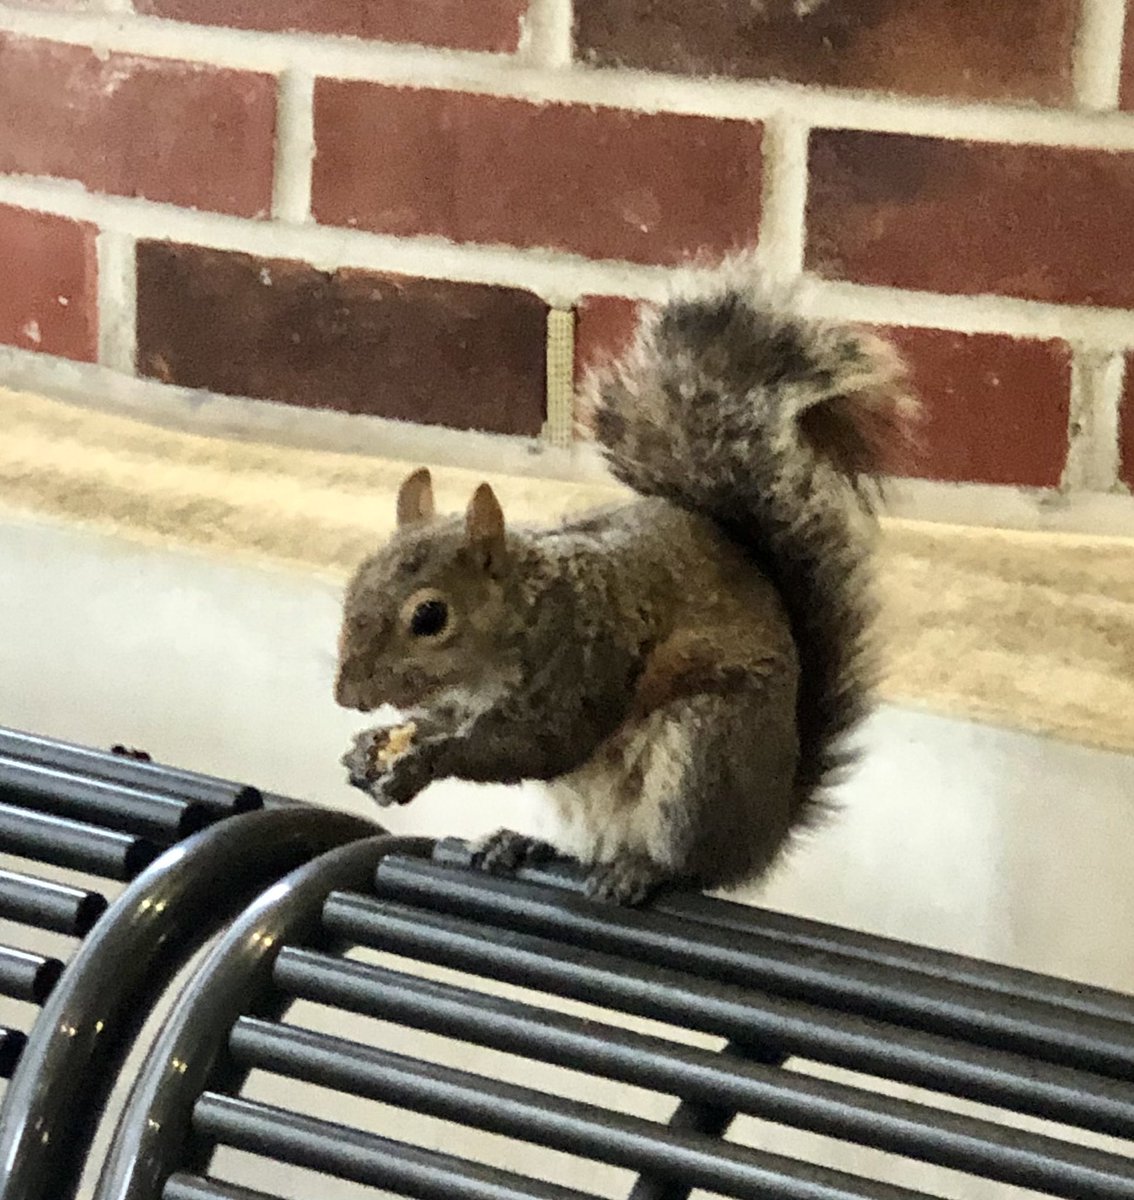 Love 💕 seeing the @VUMC_Cancer #squirrels 🐿️ getting their daily snack! Always brightens my day ⭐️🥰 #HappyFriday @VUMCHemOnc @VUMCDiscoveries @VUMC_OAP #spoiled